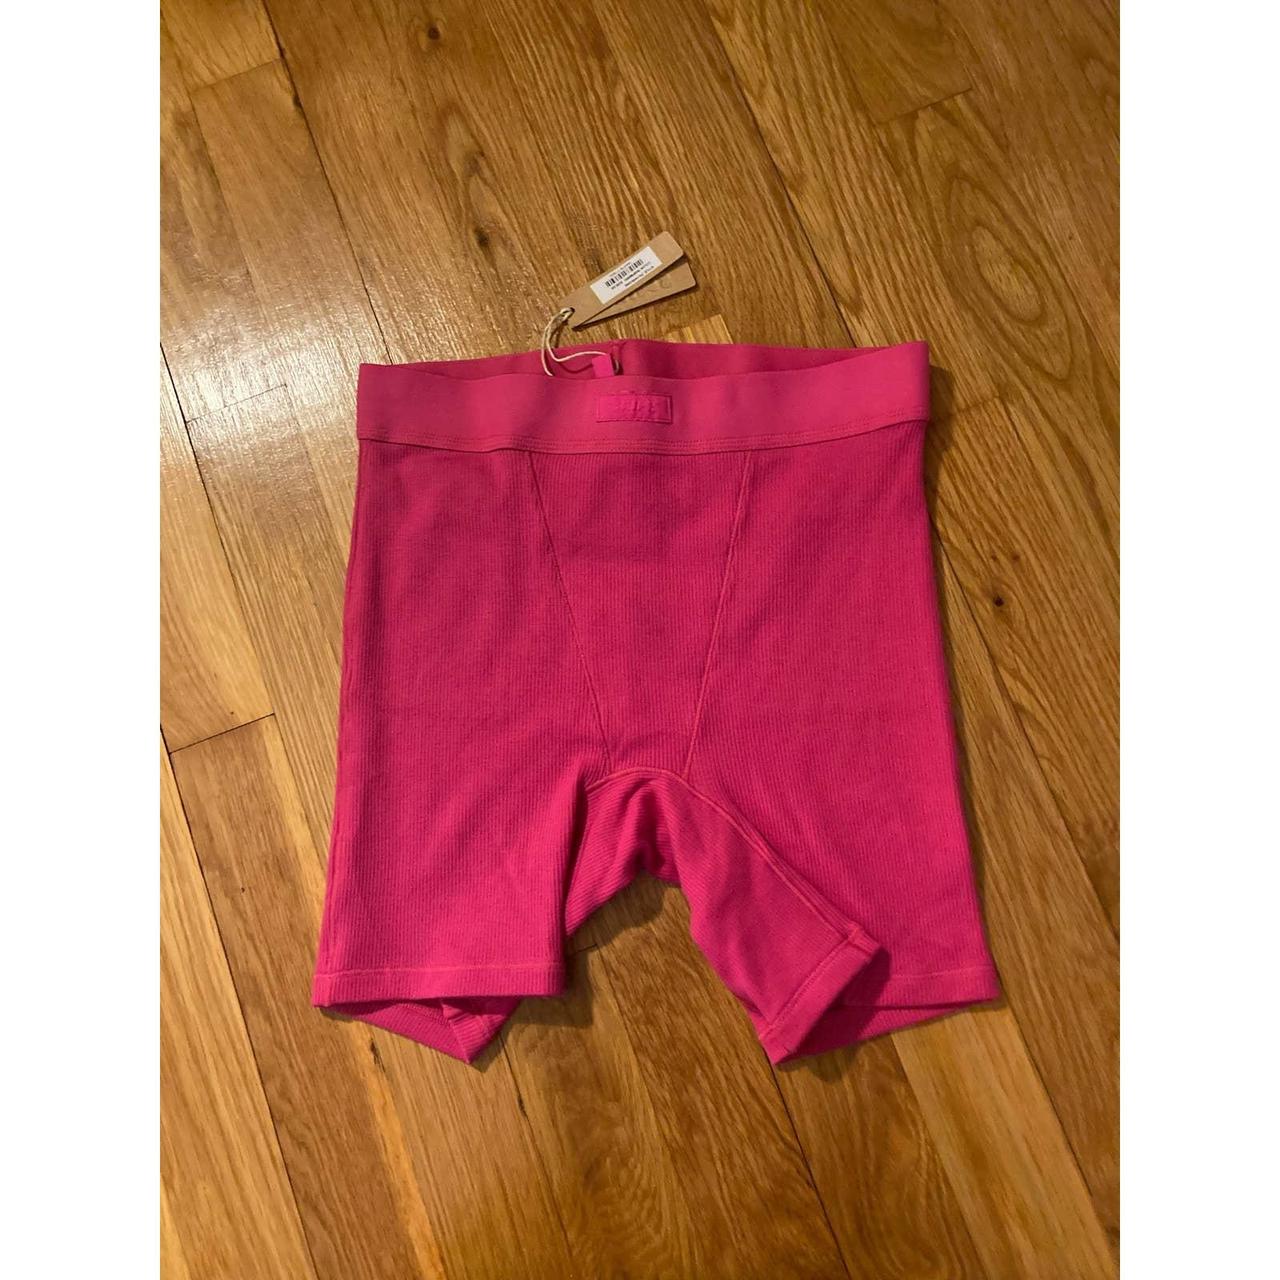 LIMITED EDITION SKIMS Size XS RASPBERRY PINK RIBBED - Depop